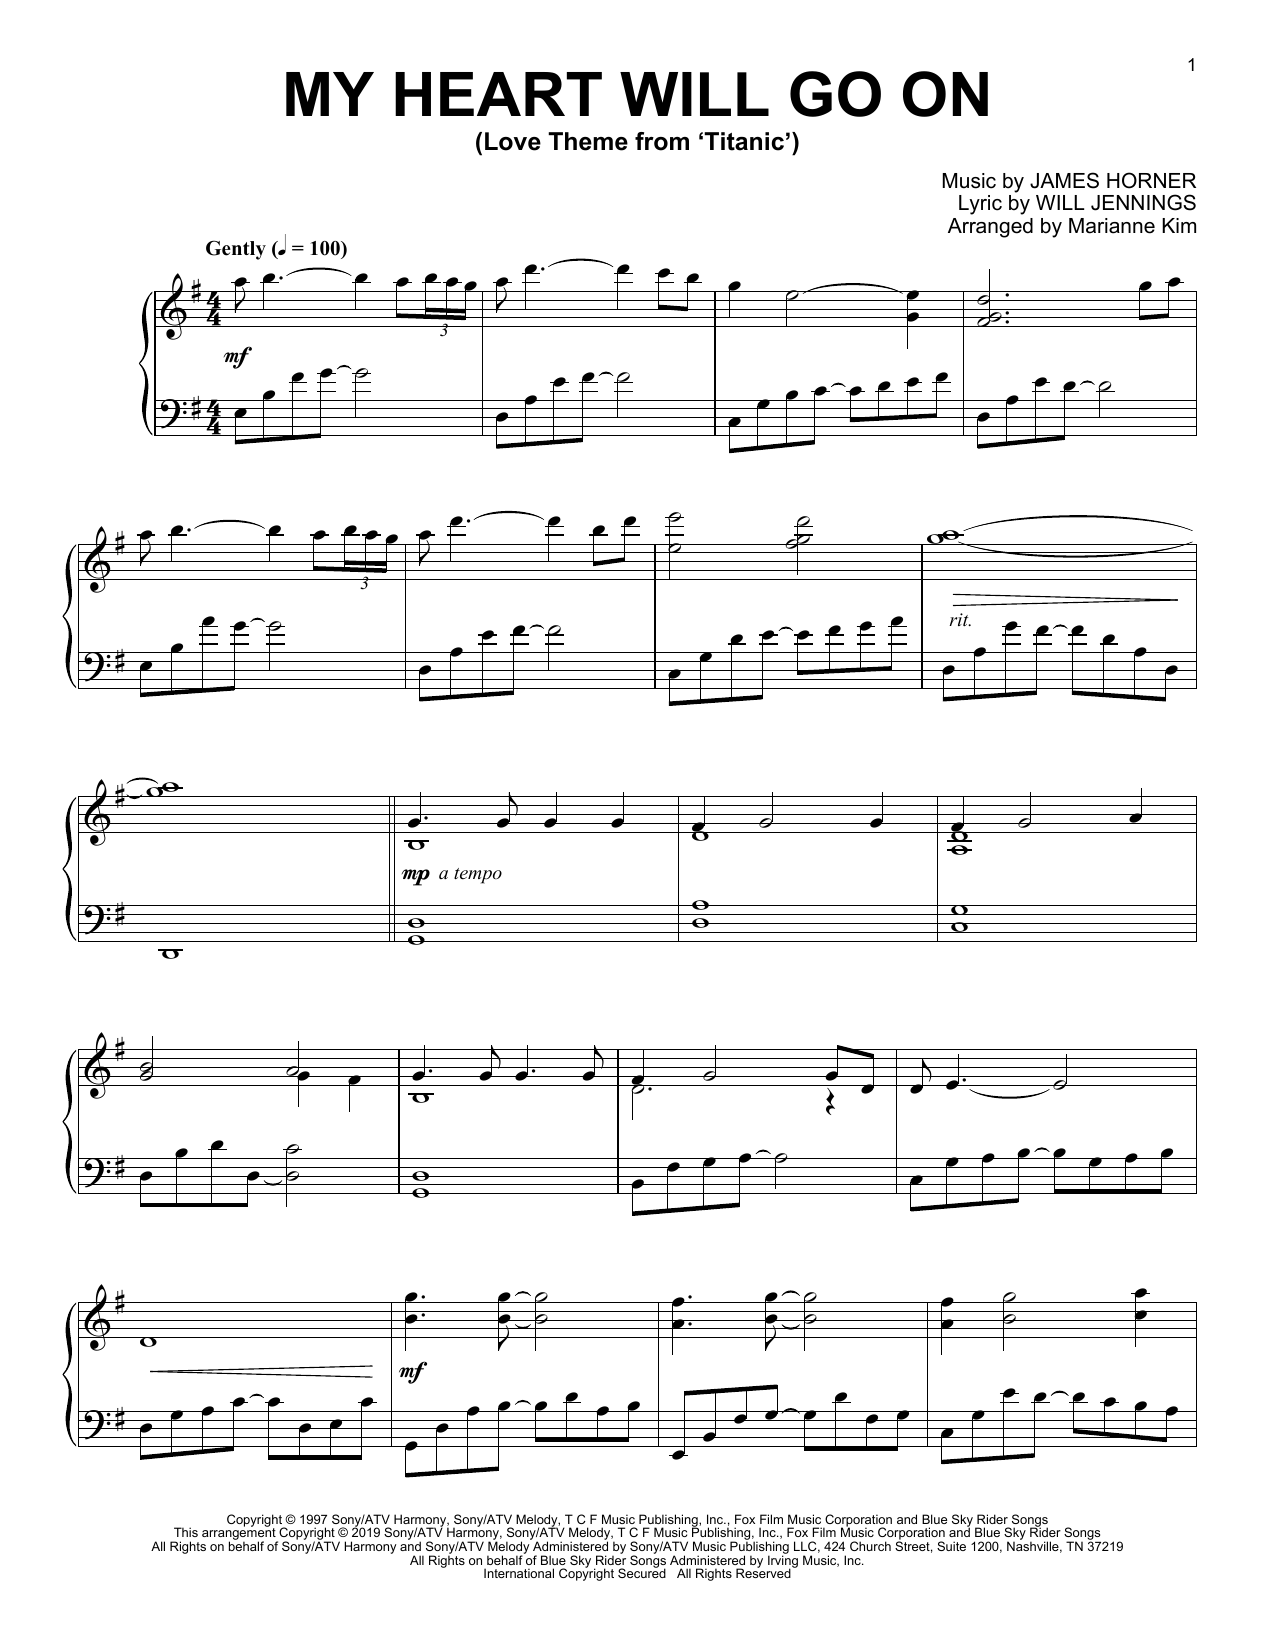 ventana Paquete o empaquetar Medalla Celine Dion "My Heart Will Go On (Love Theme From 'Titanic') (arr. Marianne  Kim)" Sheet Music PDF Notes, Chords | Pop Score Piano Solo Download  Printable. SKU: 424377